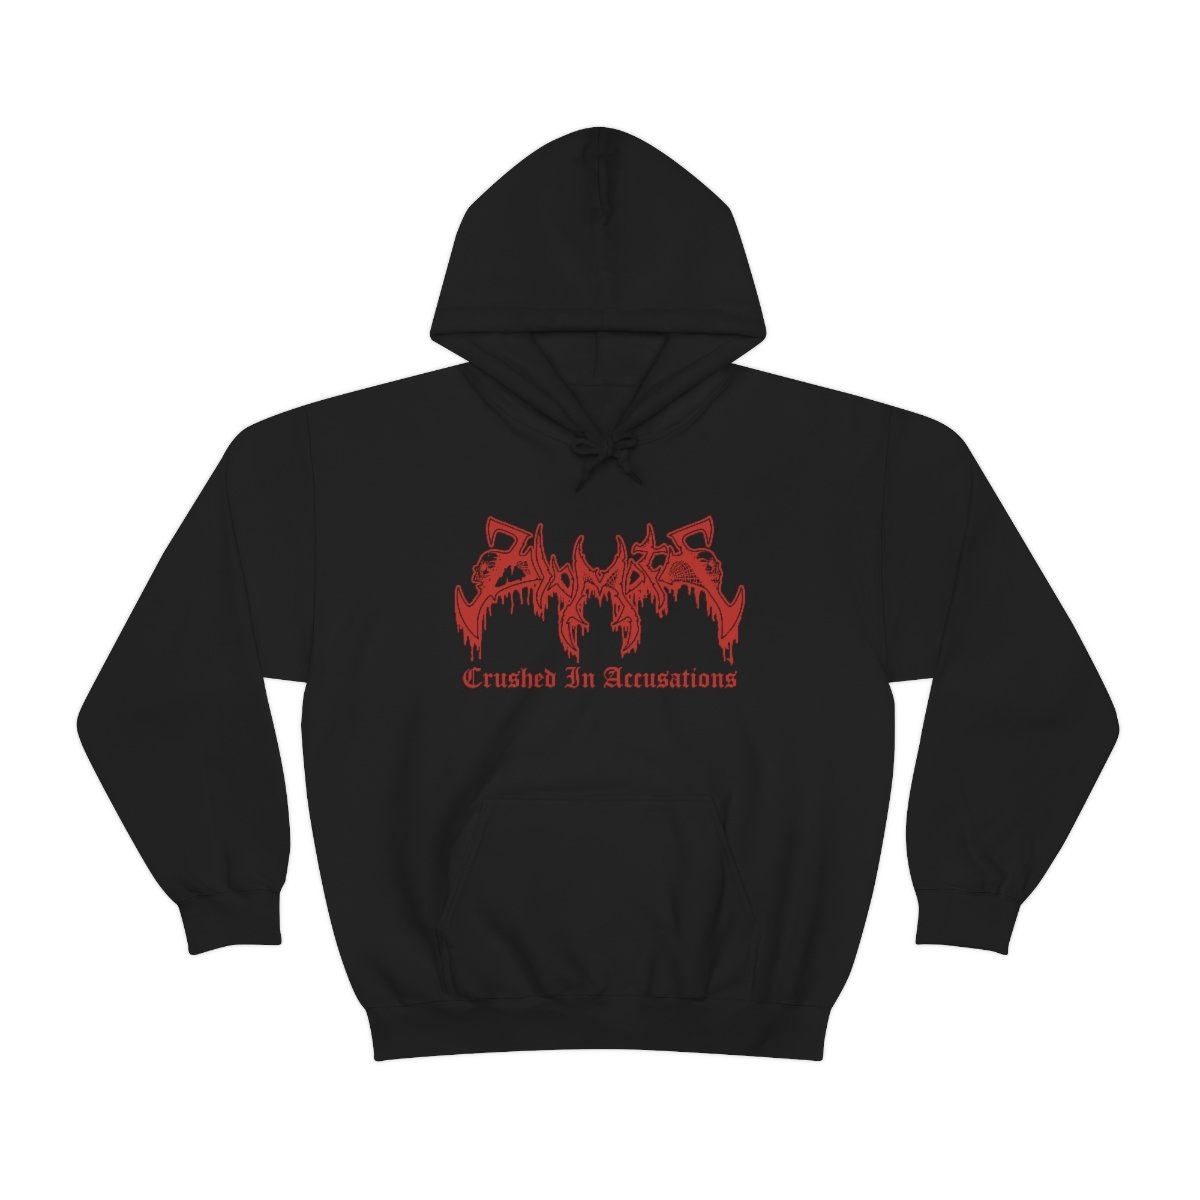 Diamoth – Crushed in Accusations Pullover Hooded Sweatshirt